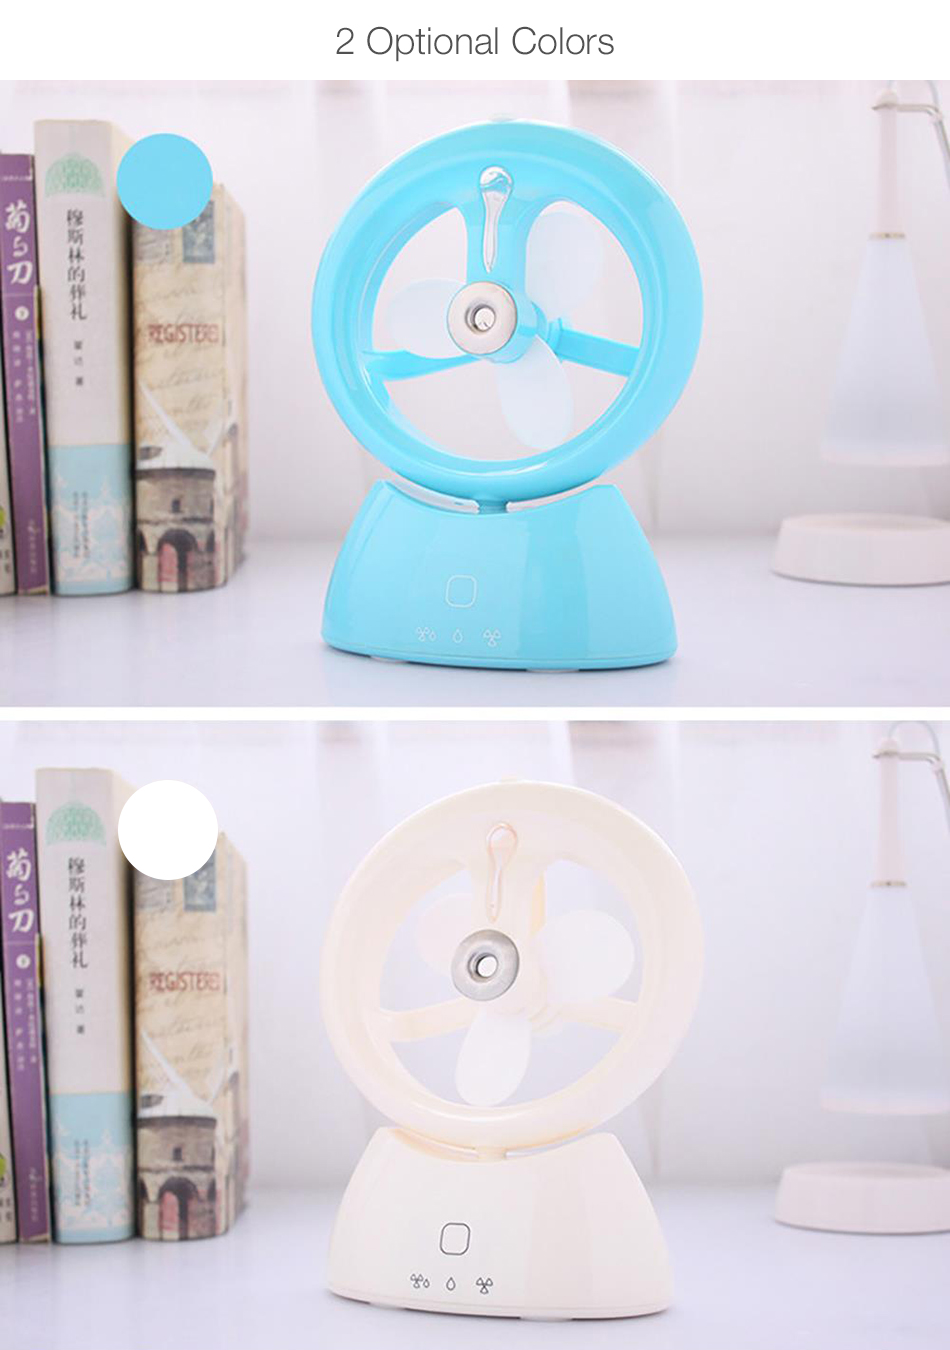 Home-Mini-Portable-2-in-1-Electronic-Desktop-USB-Rechargeable-Air-Humidifier-Cooling-Spray-Fan-1345769-4